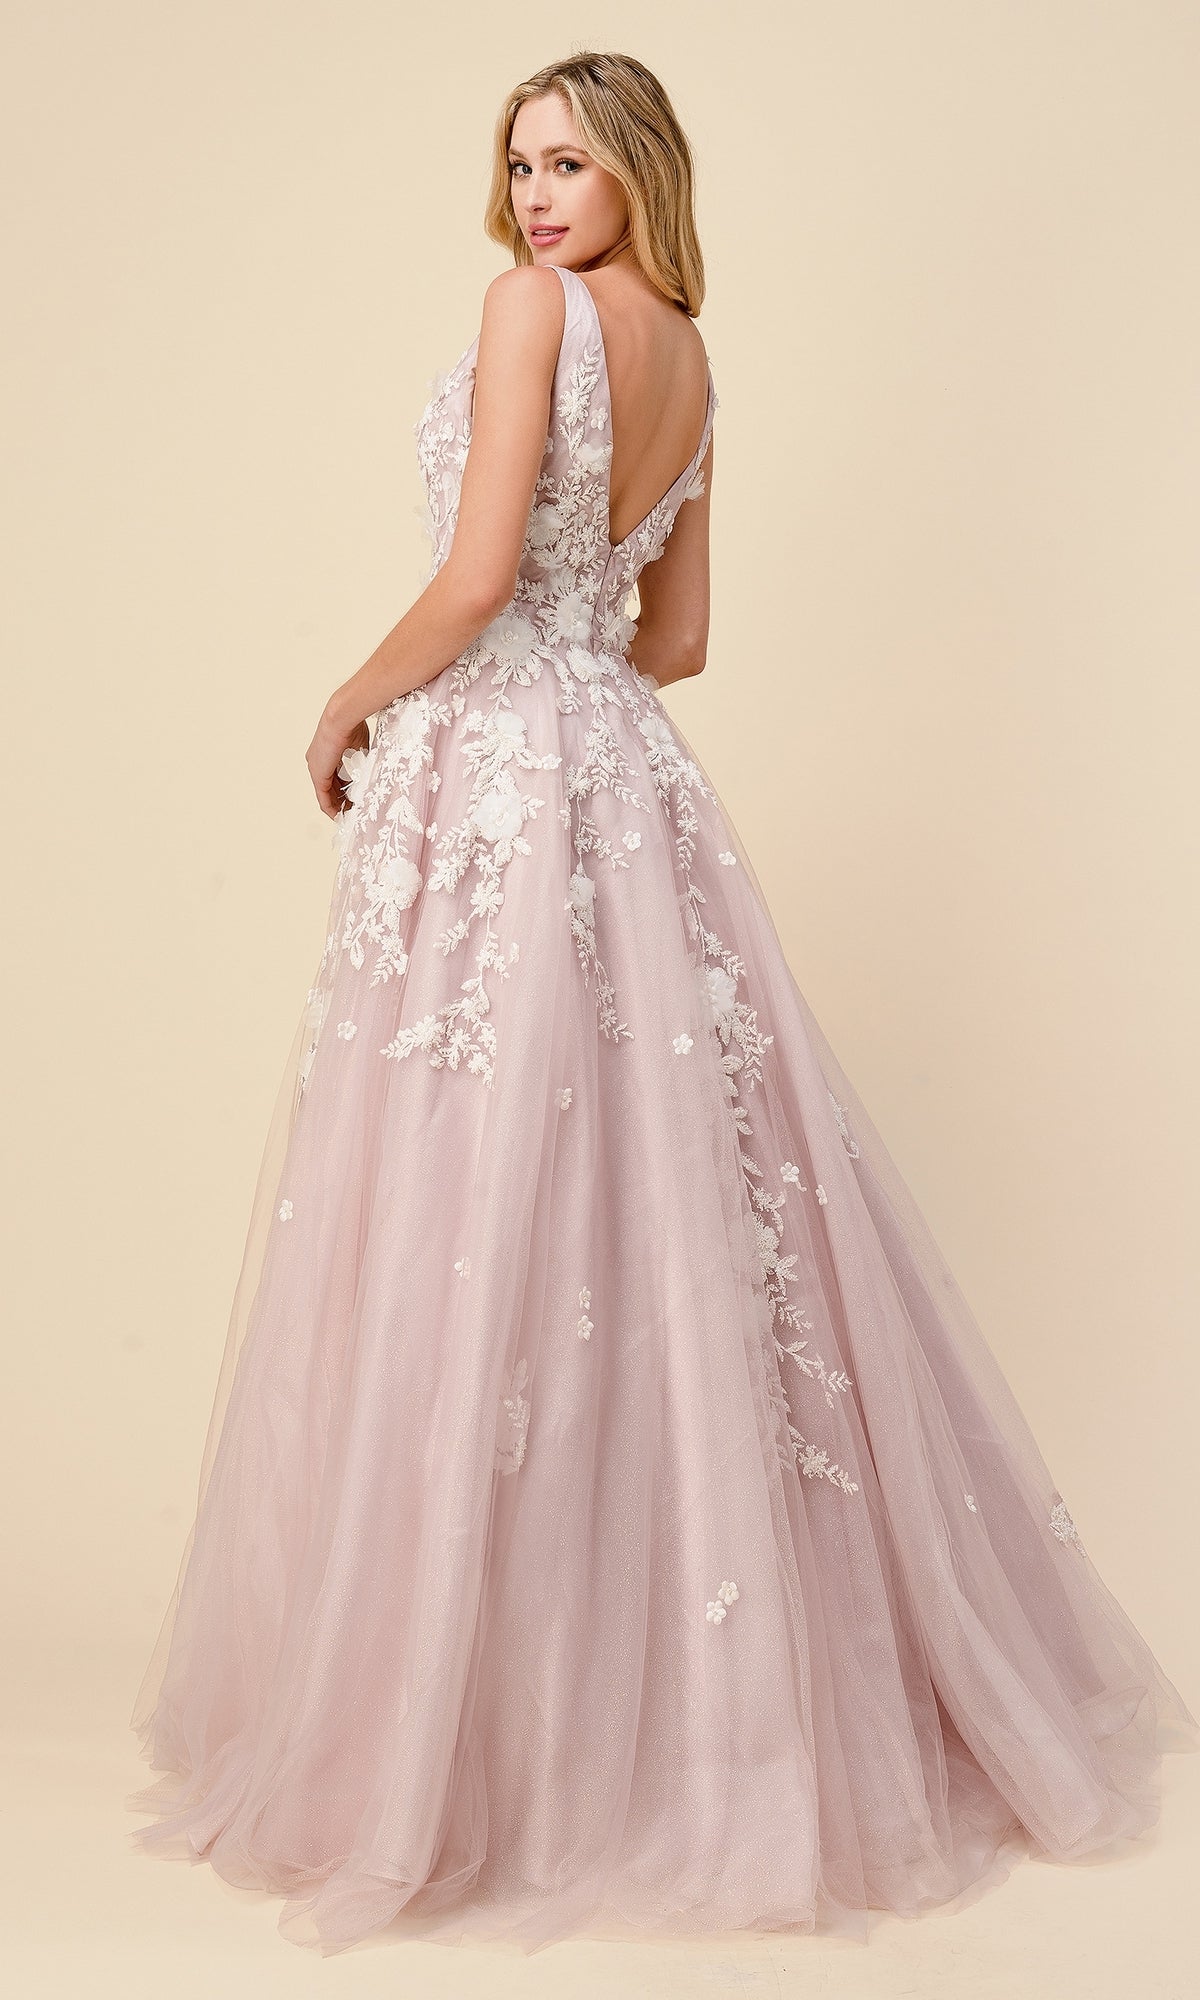 Plunging V-Neck Long Floral Prom Ball Gown A1028